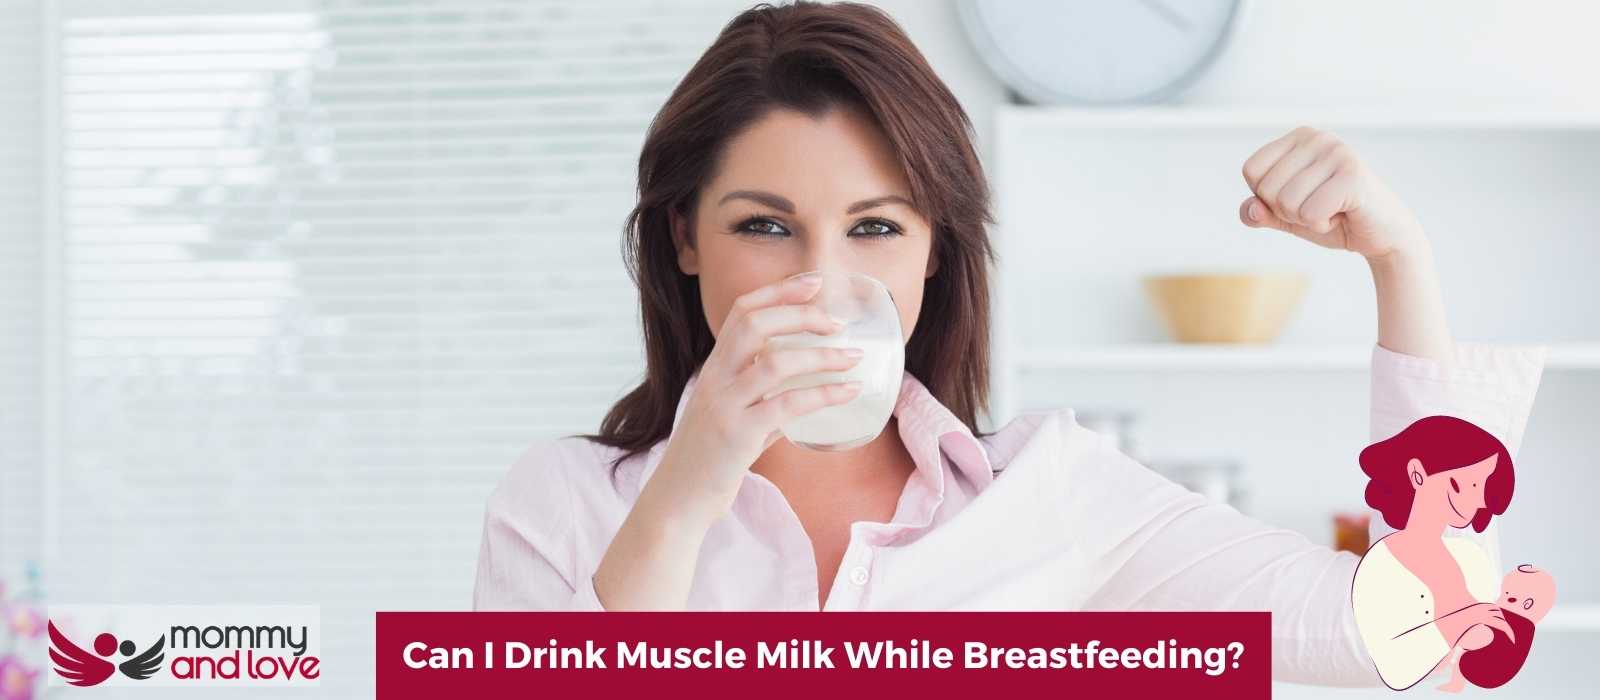 Can I Drink Muscle Milk While Breastfeeding